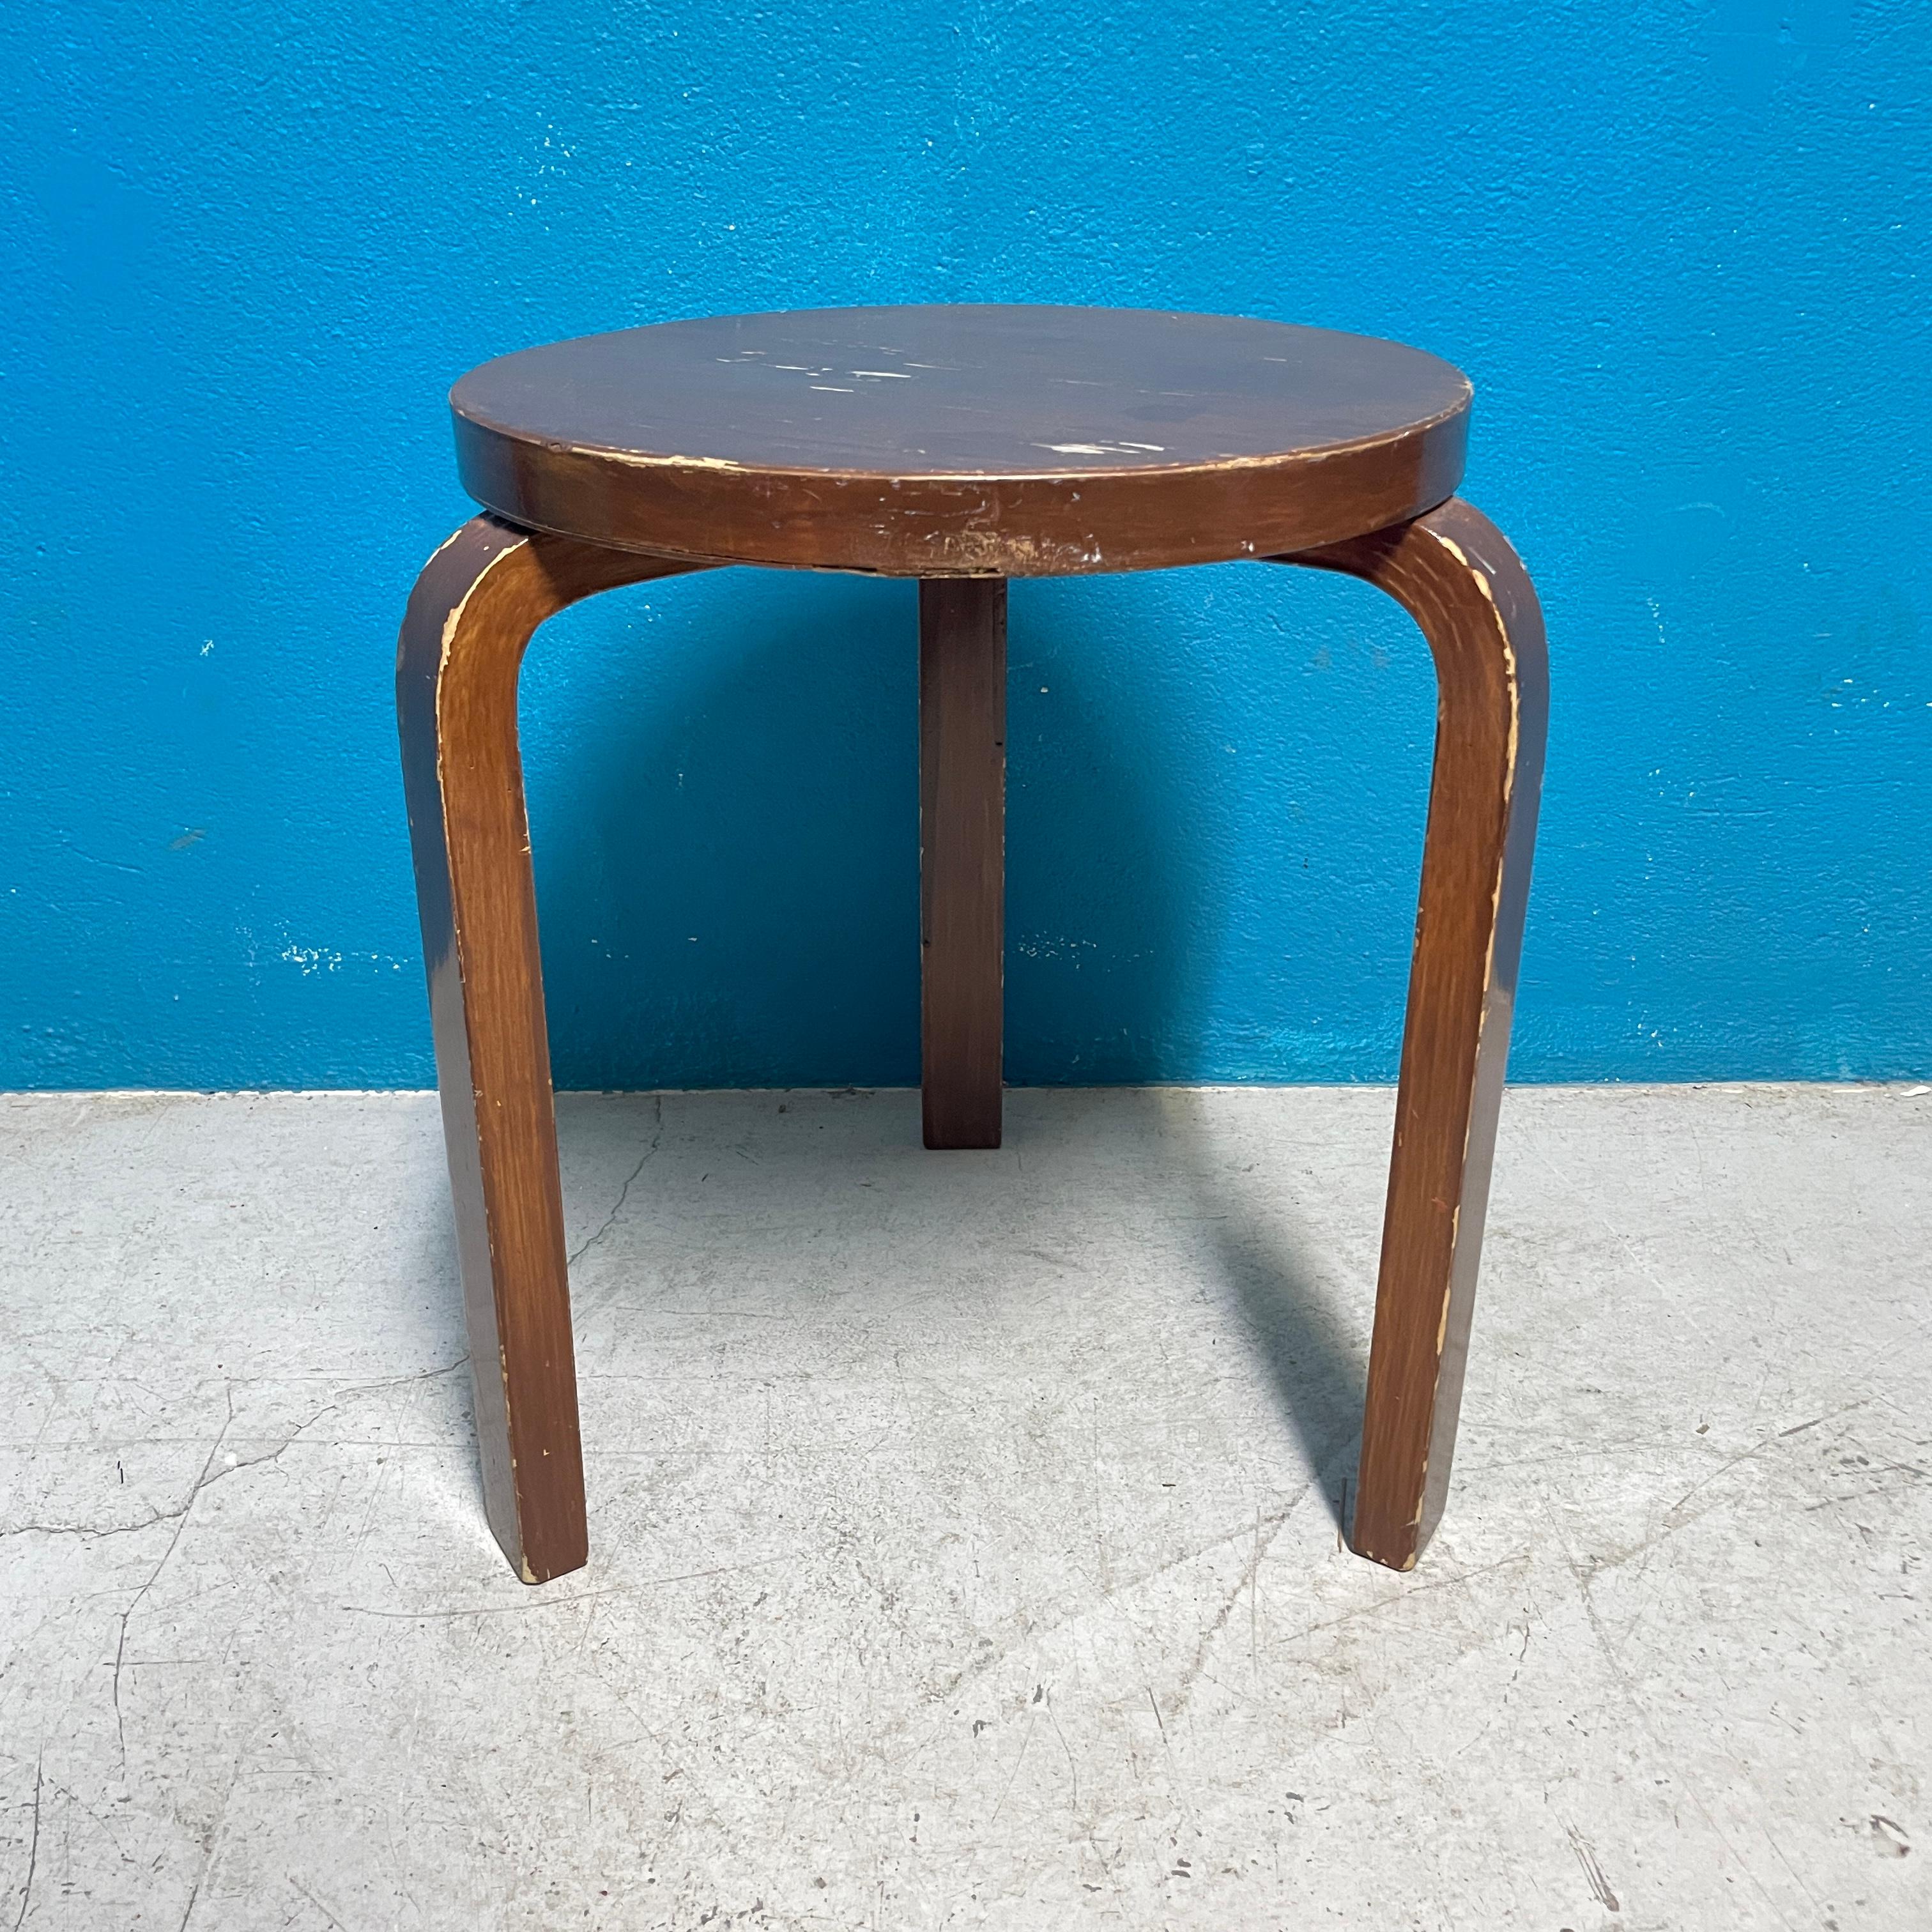 Iconic Aalto three-legged stool. Stool 60 was officially unveiled to an enthusiastic public in London at a Finnish furniture review in November 1933.
The stool’s revolutionary L-leg structure was a major boost for the modern Scandinavian design